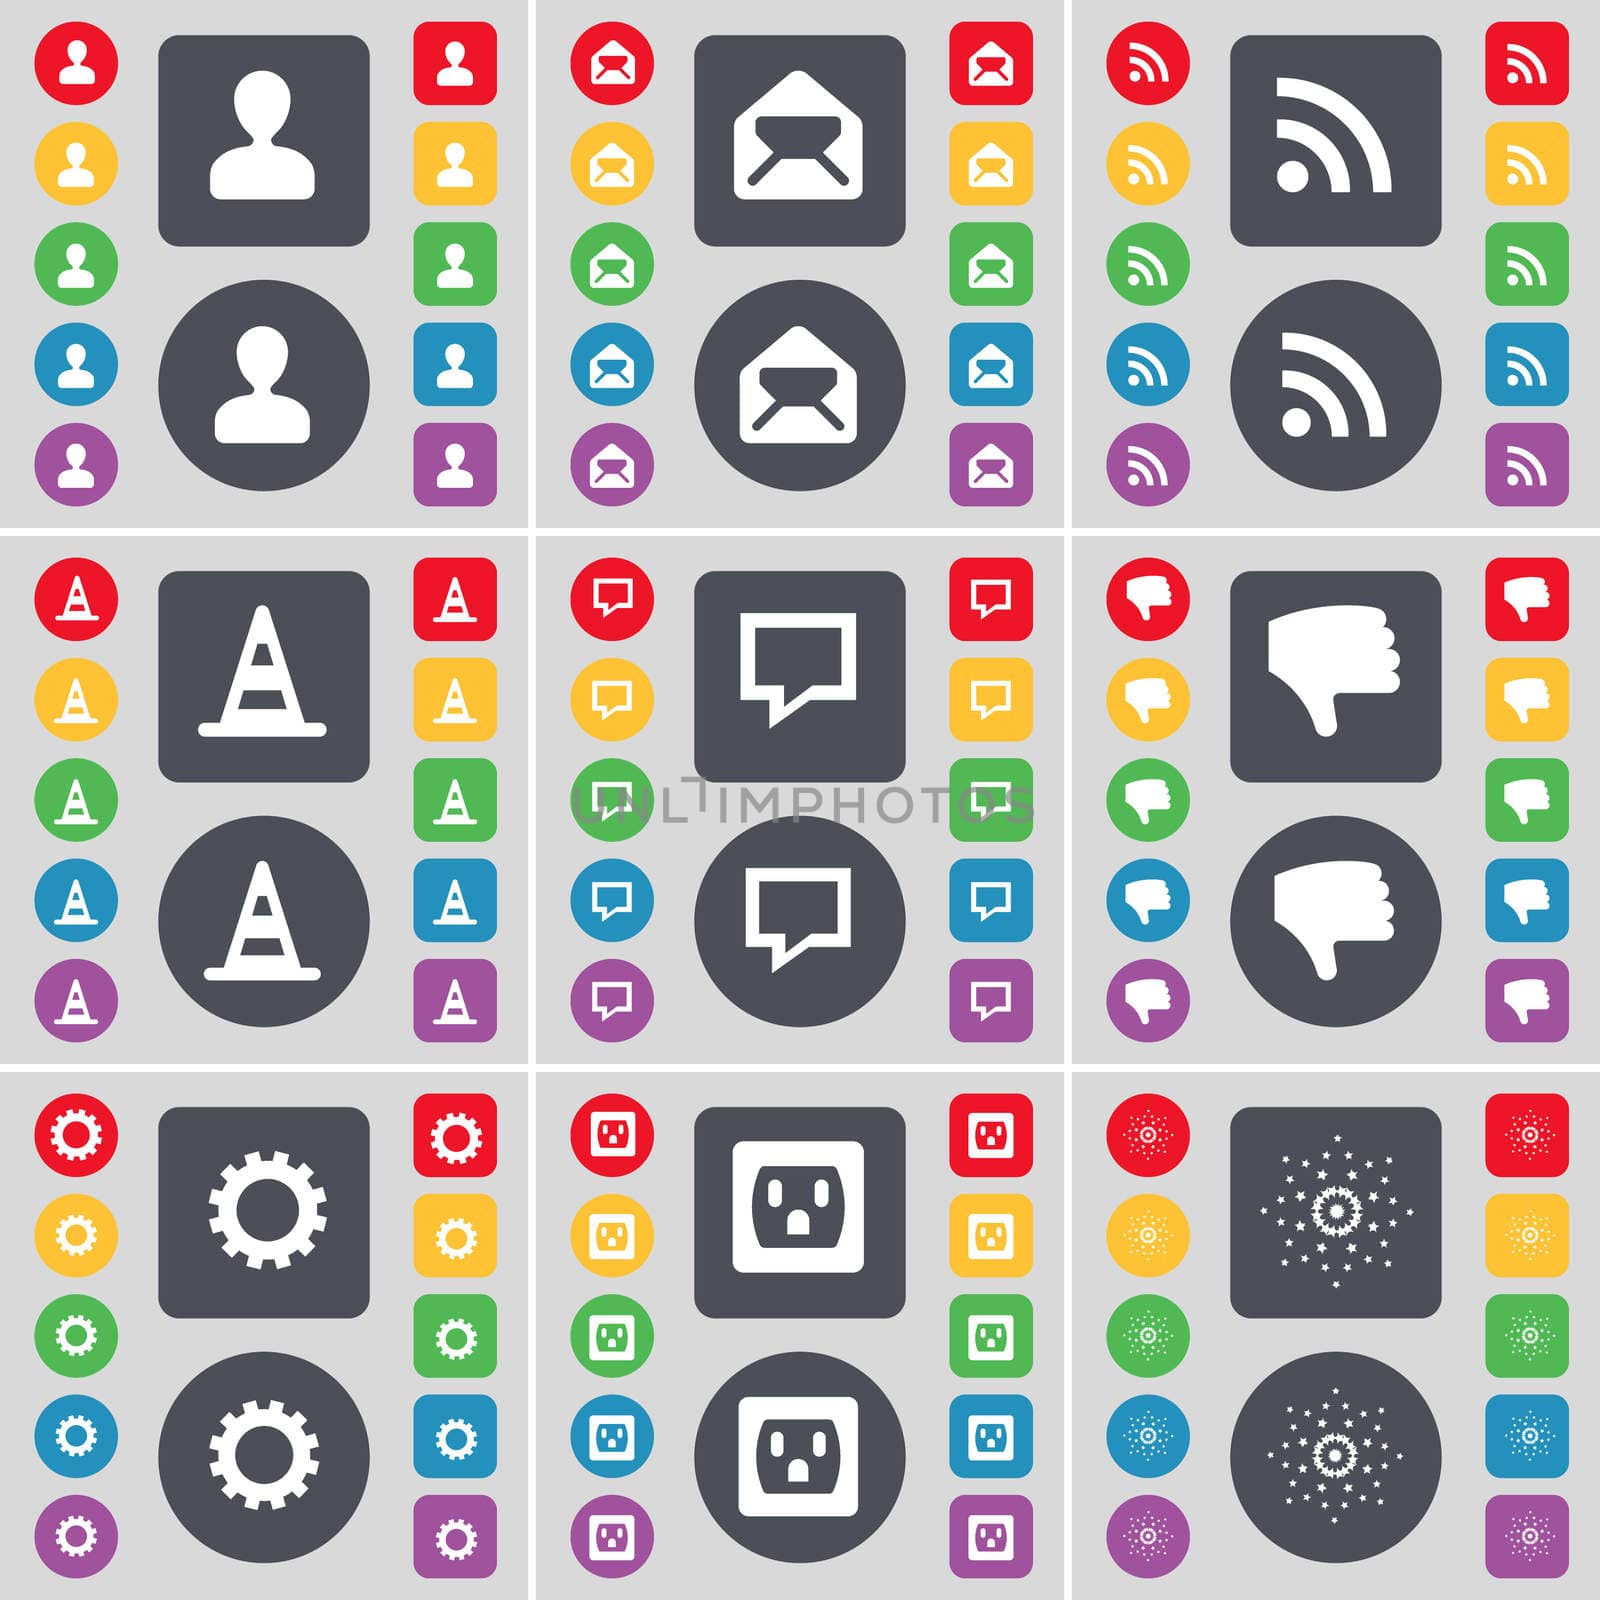 Avatar, Message, RSS, Cone, Chat bubble, Dislike, Gear, Socket, icon symbol. A large set of flat, colored buttons for your design.  by serhii_lohvyniuk